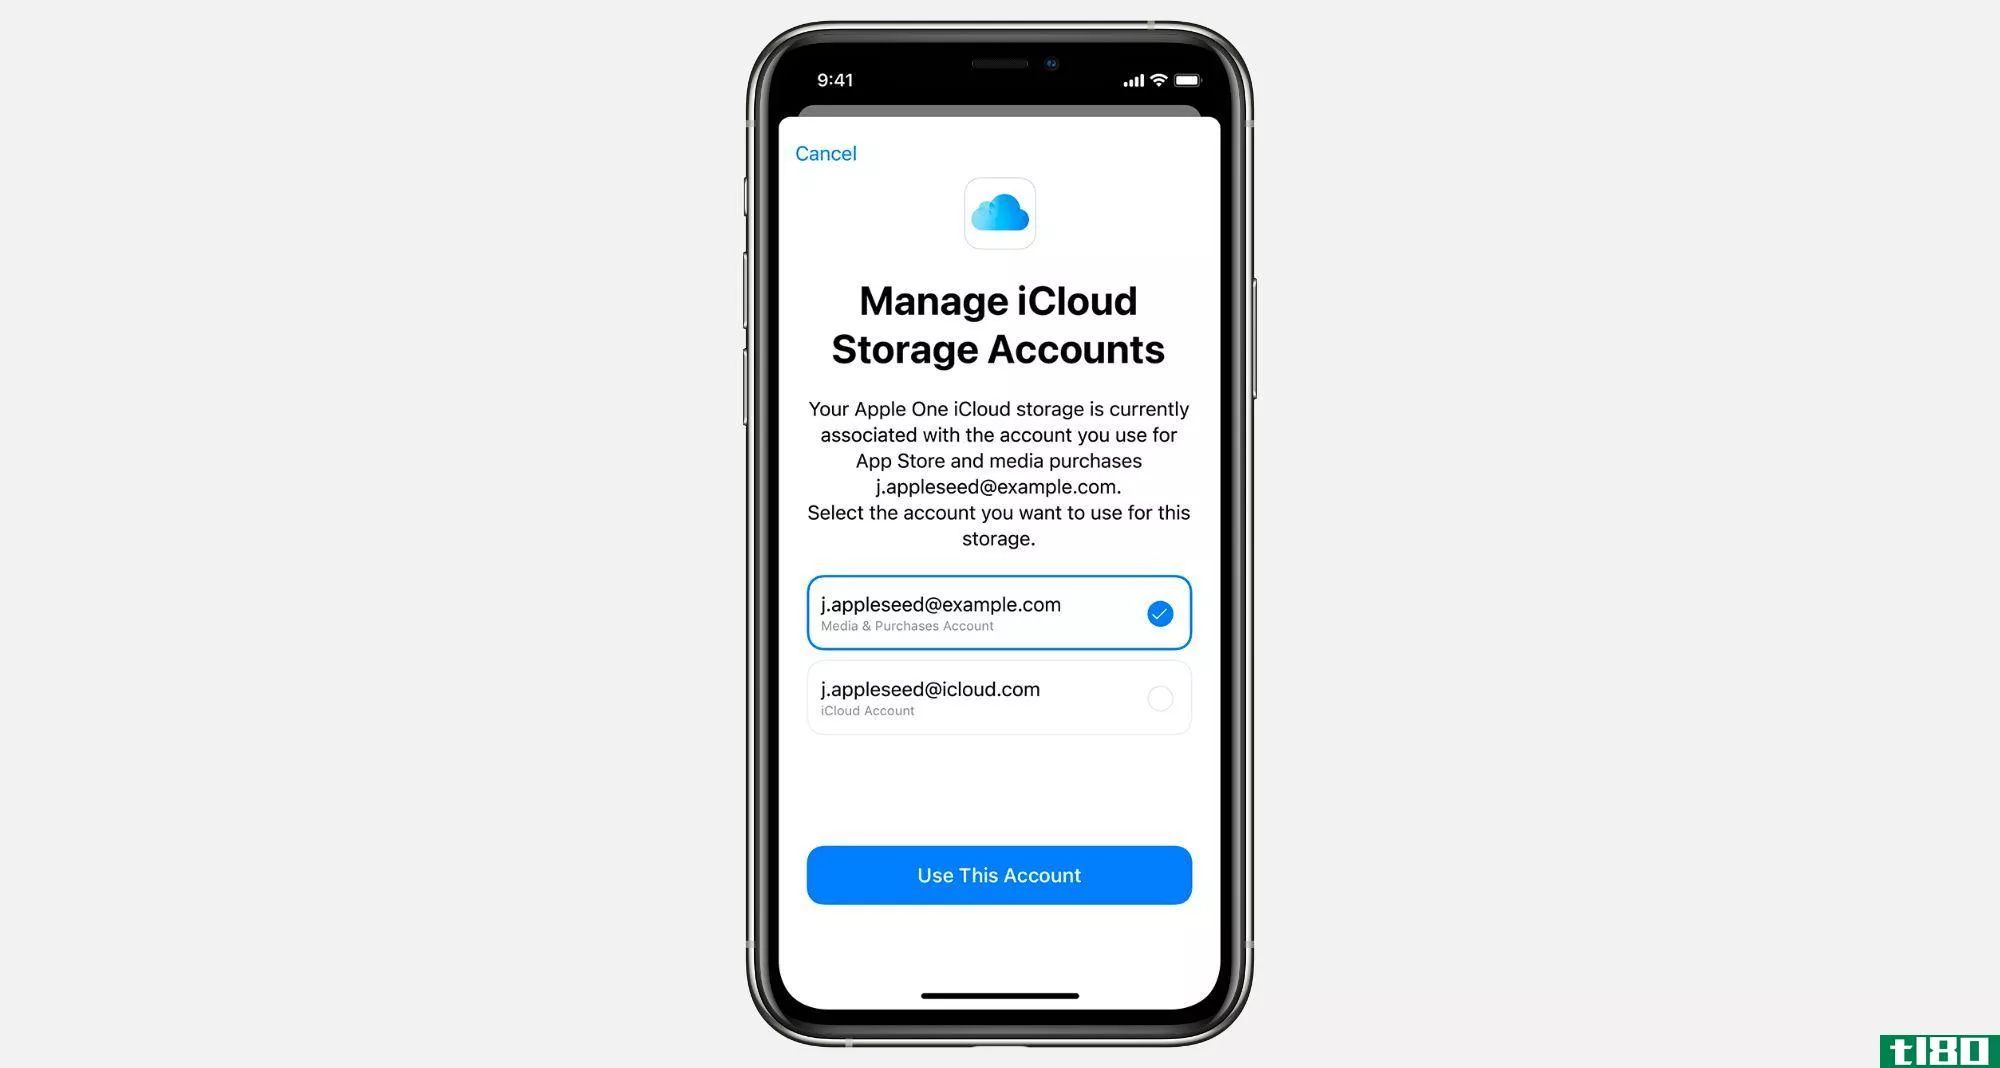 Use This Account option in iPhone Apple One iCloud settings